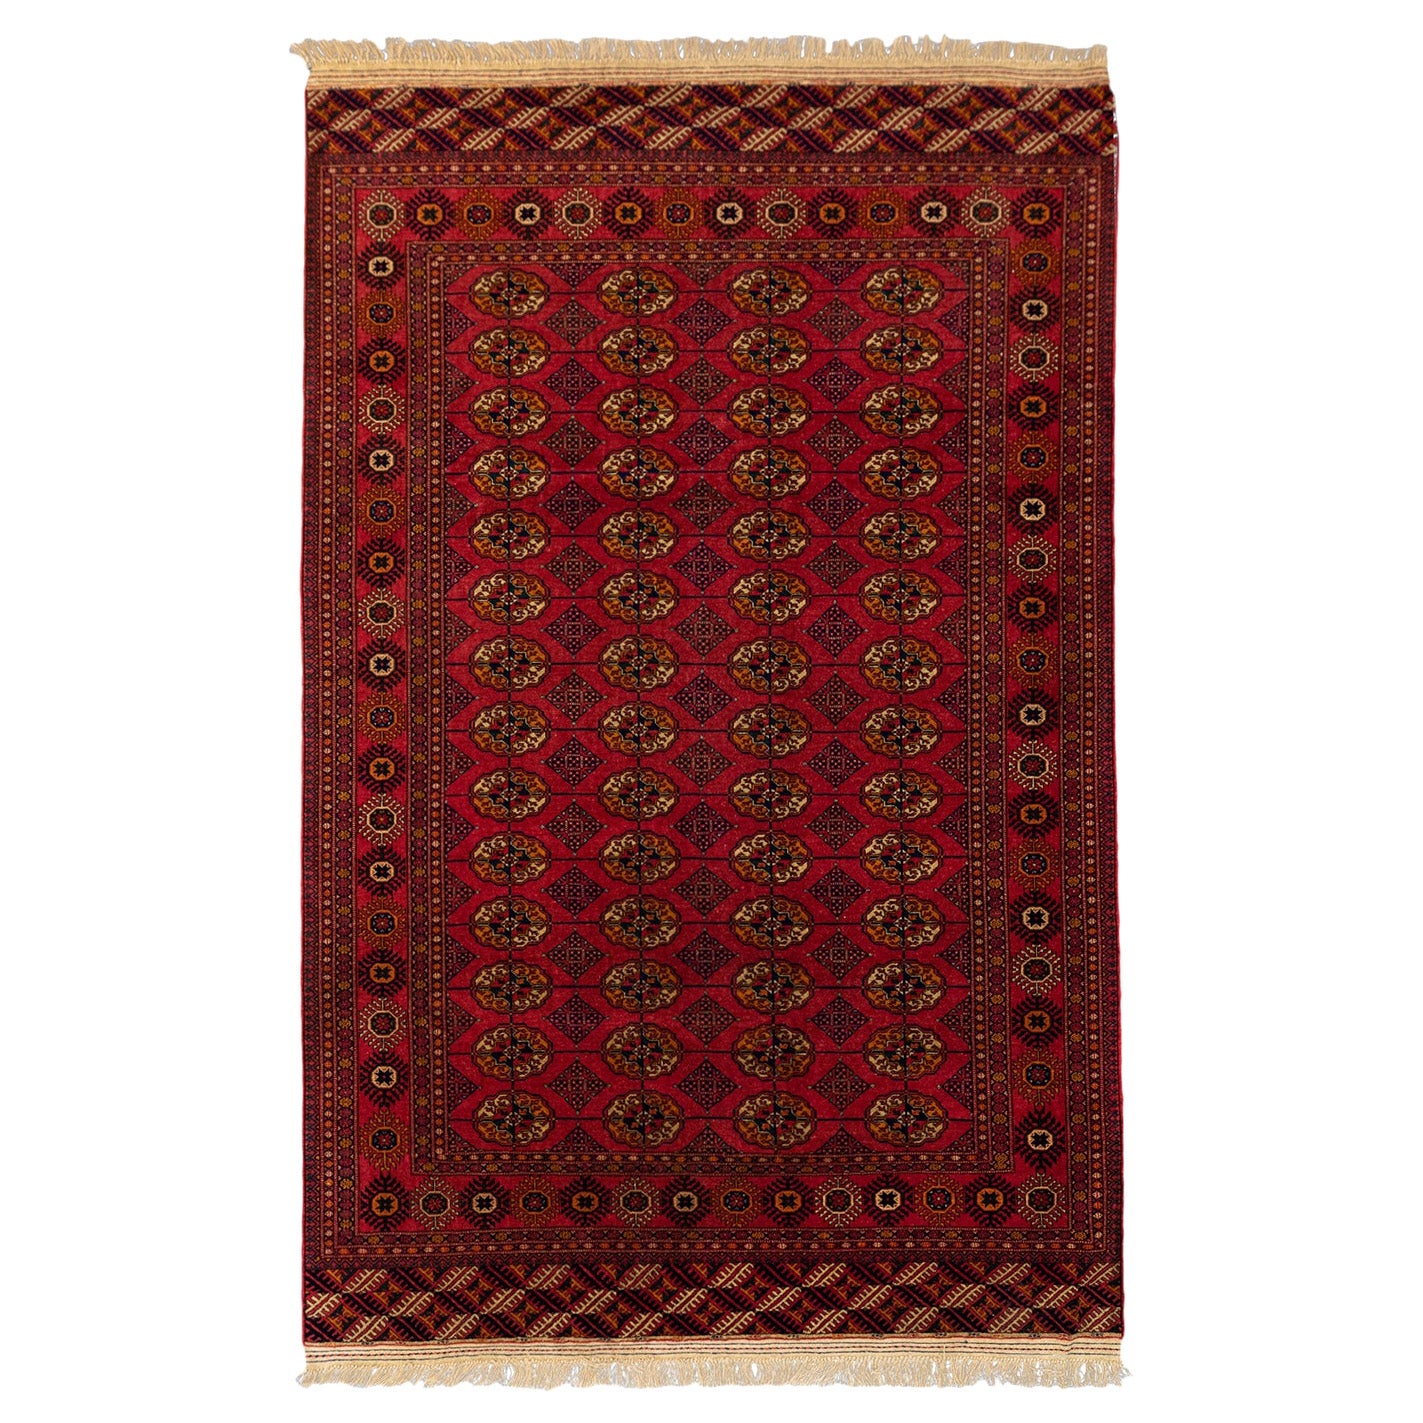 Bukhara-Teppich in Rot, Vintage